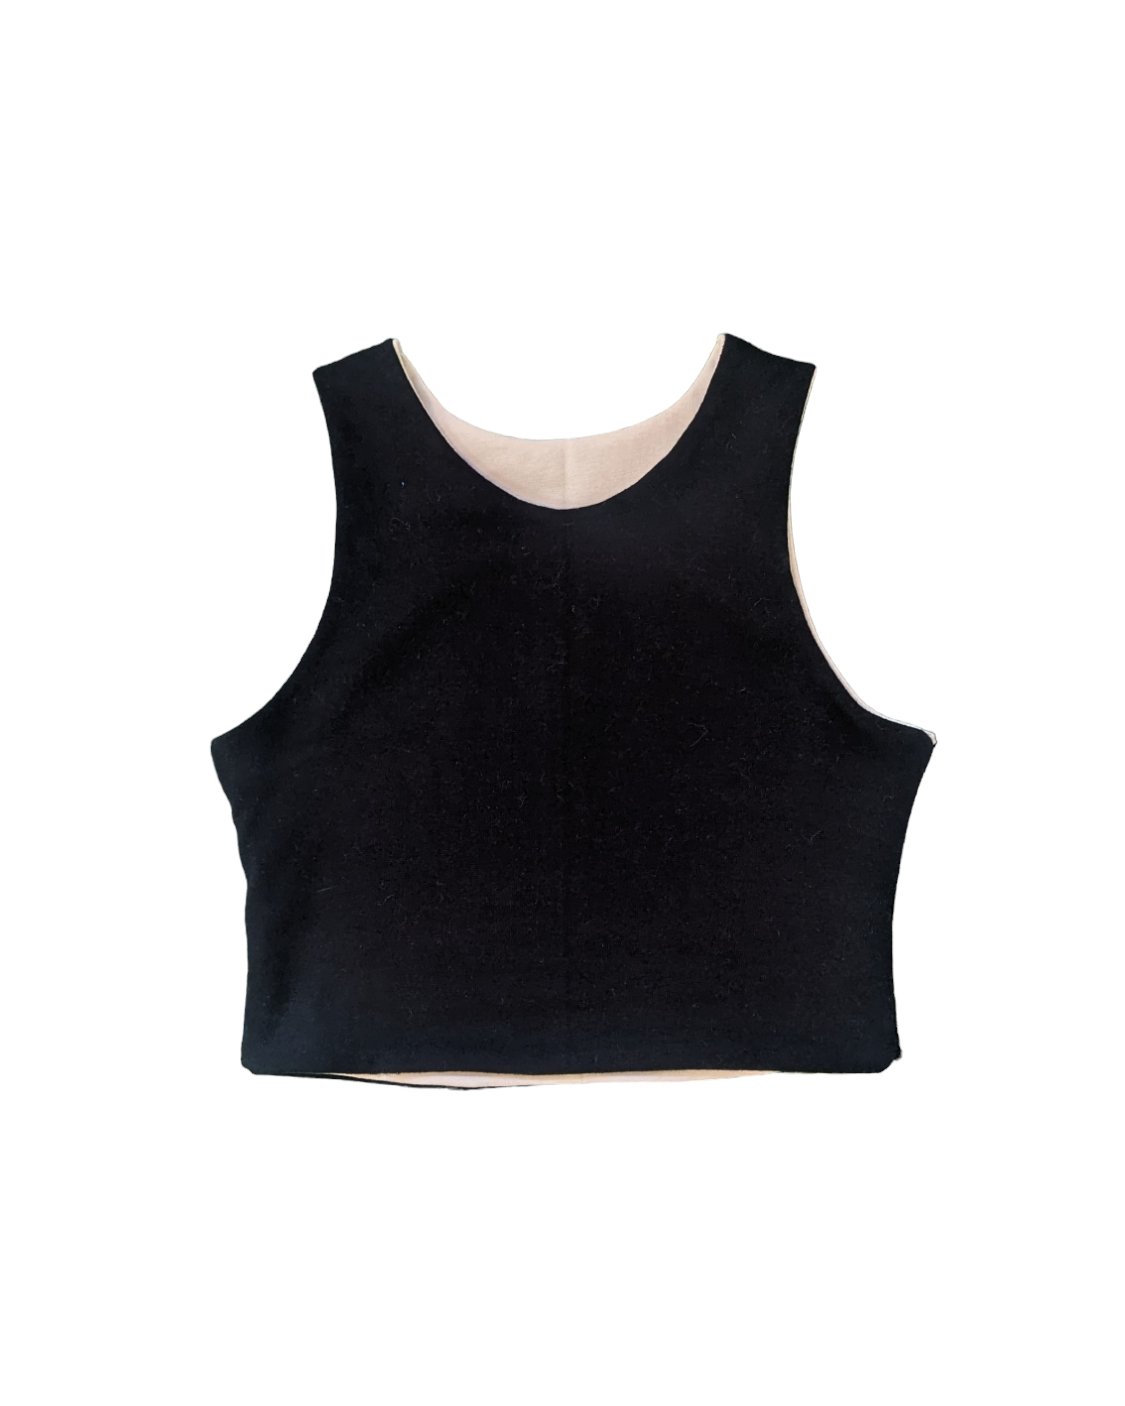 Image of CATCALL: THE REVERSIBLE CROP TOP in GREY